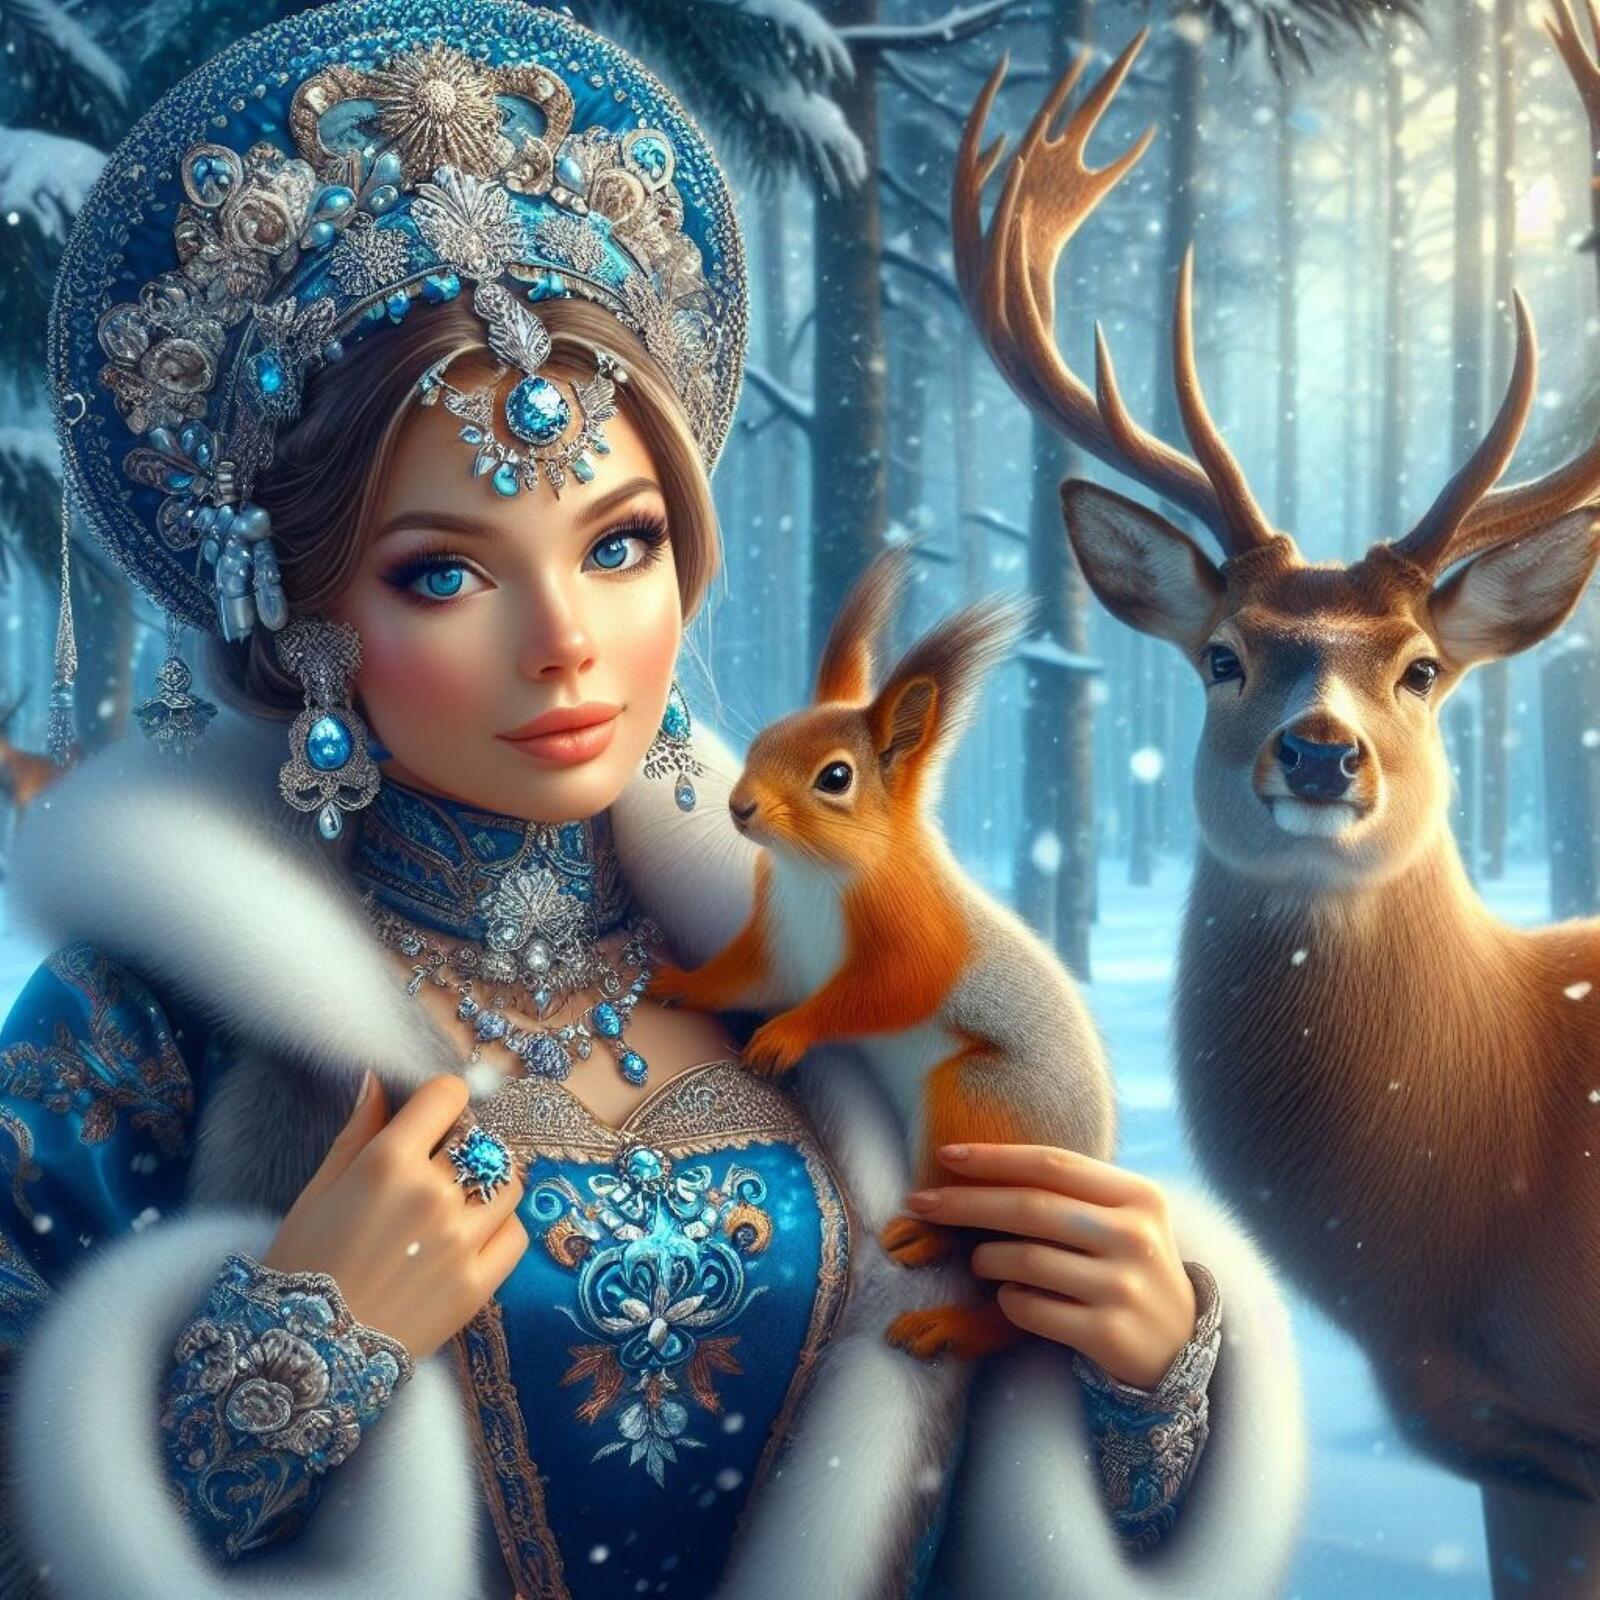 Free photo The Snow Maiden in the forest